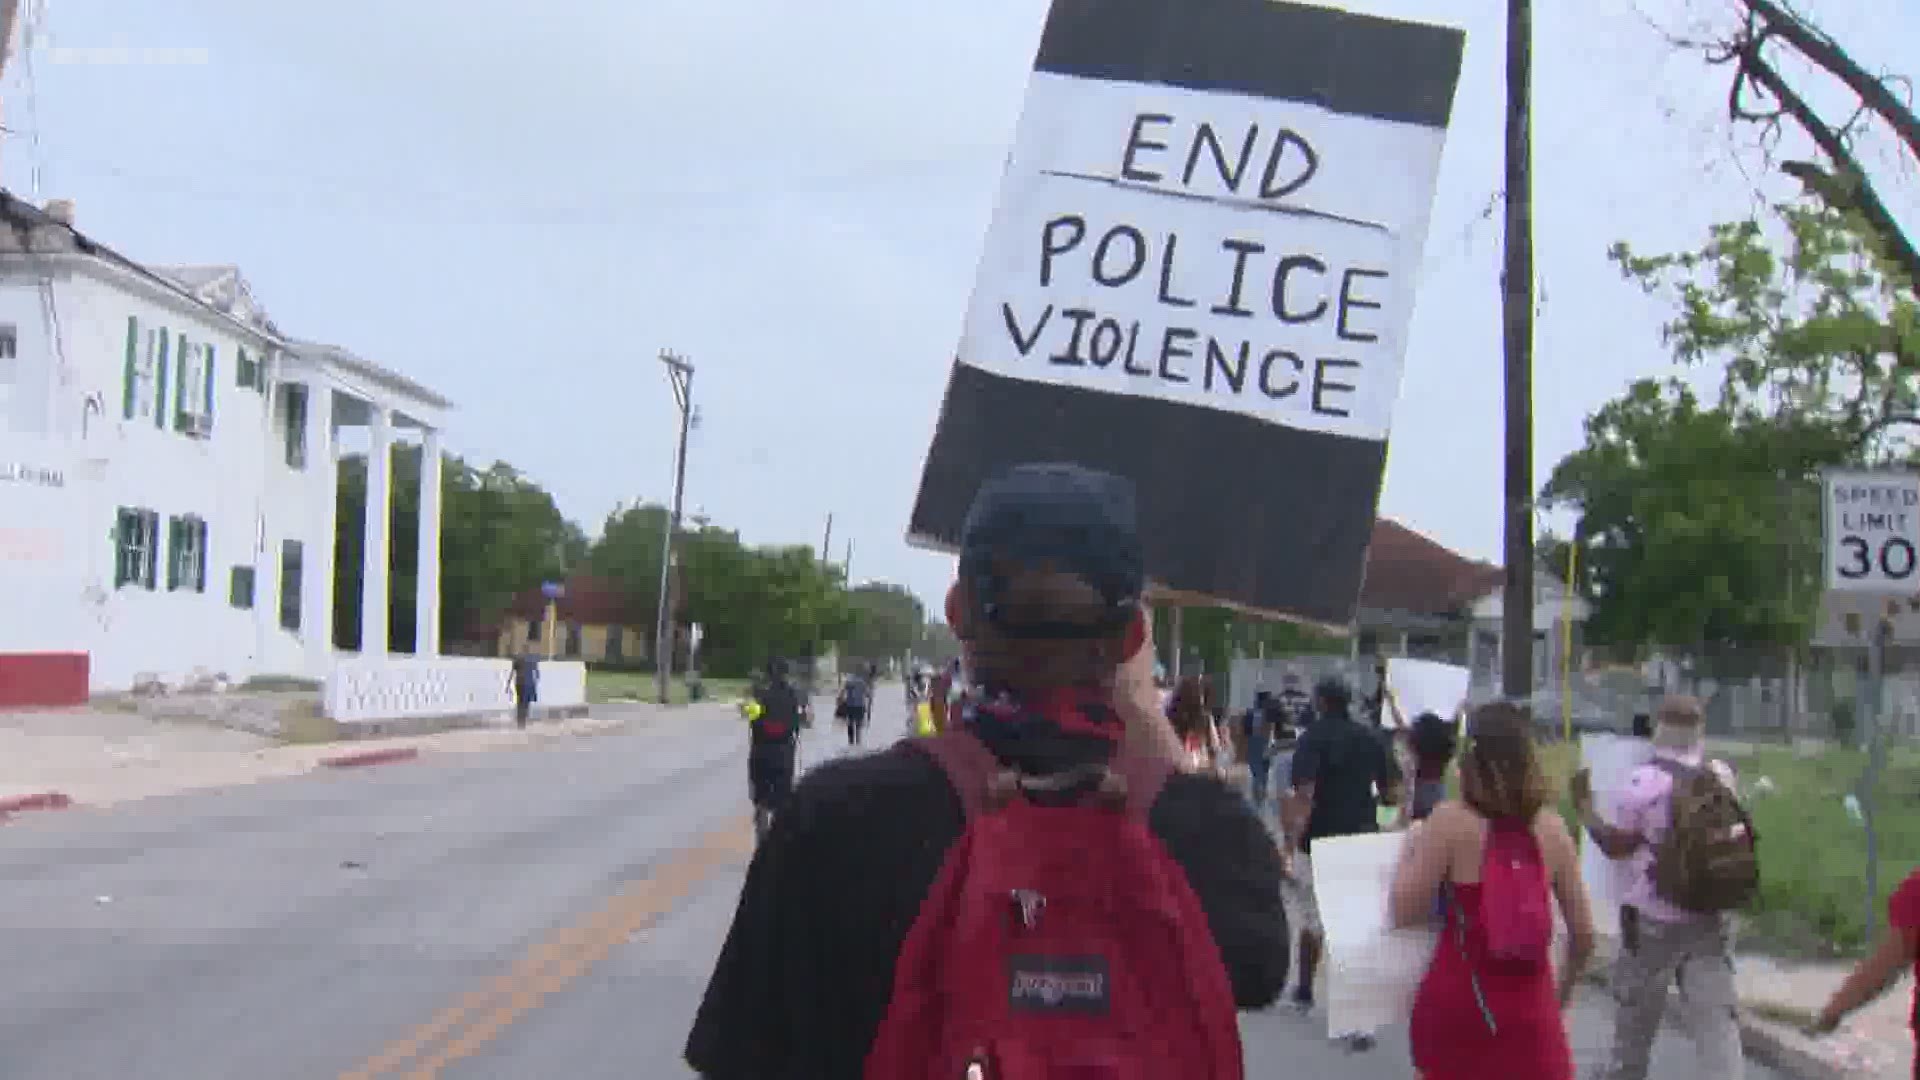 It's been about a month since protesters first began taking to downtown streets in the Alamo City.